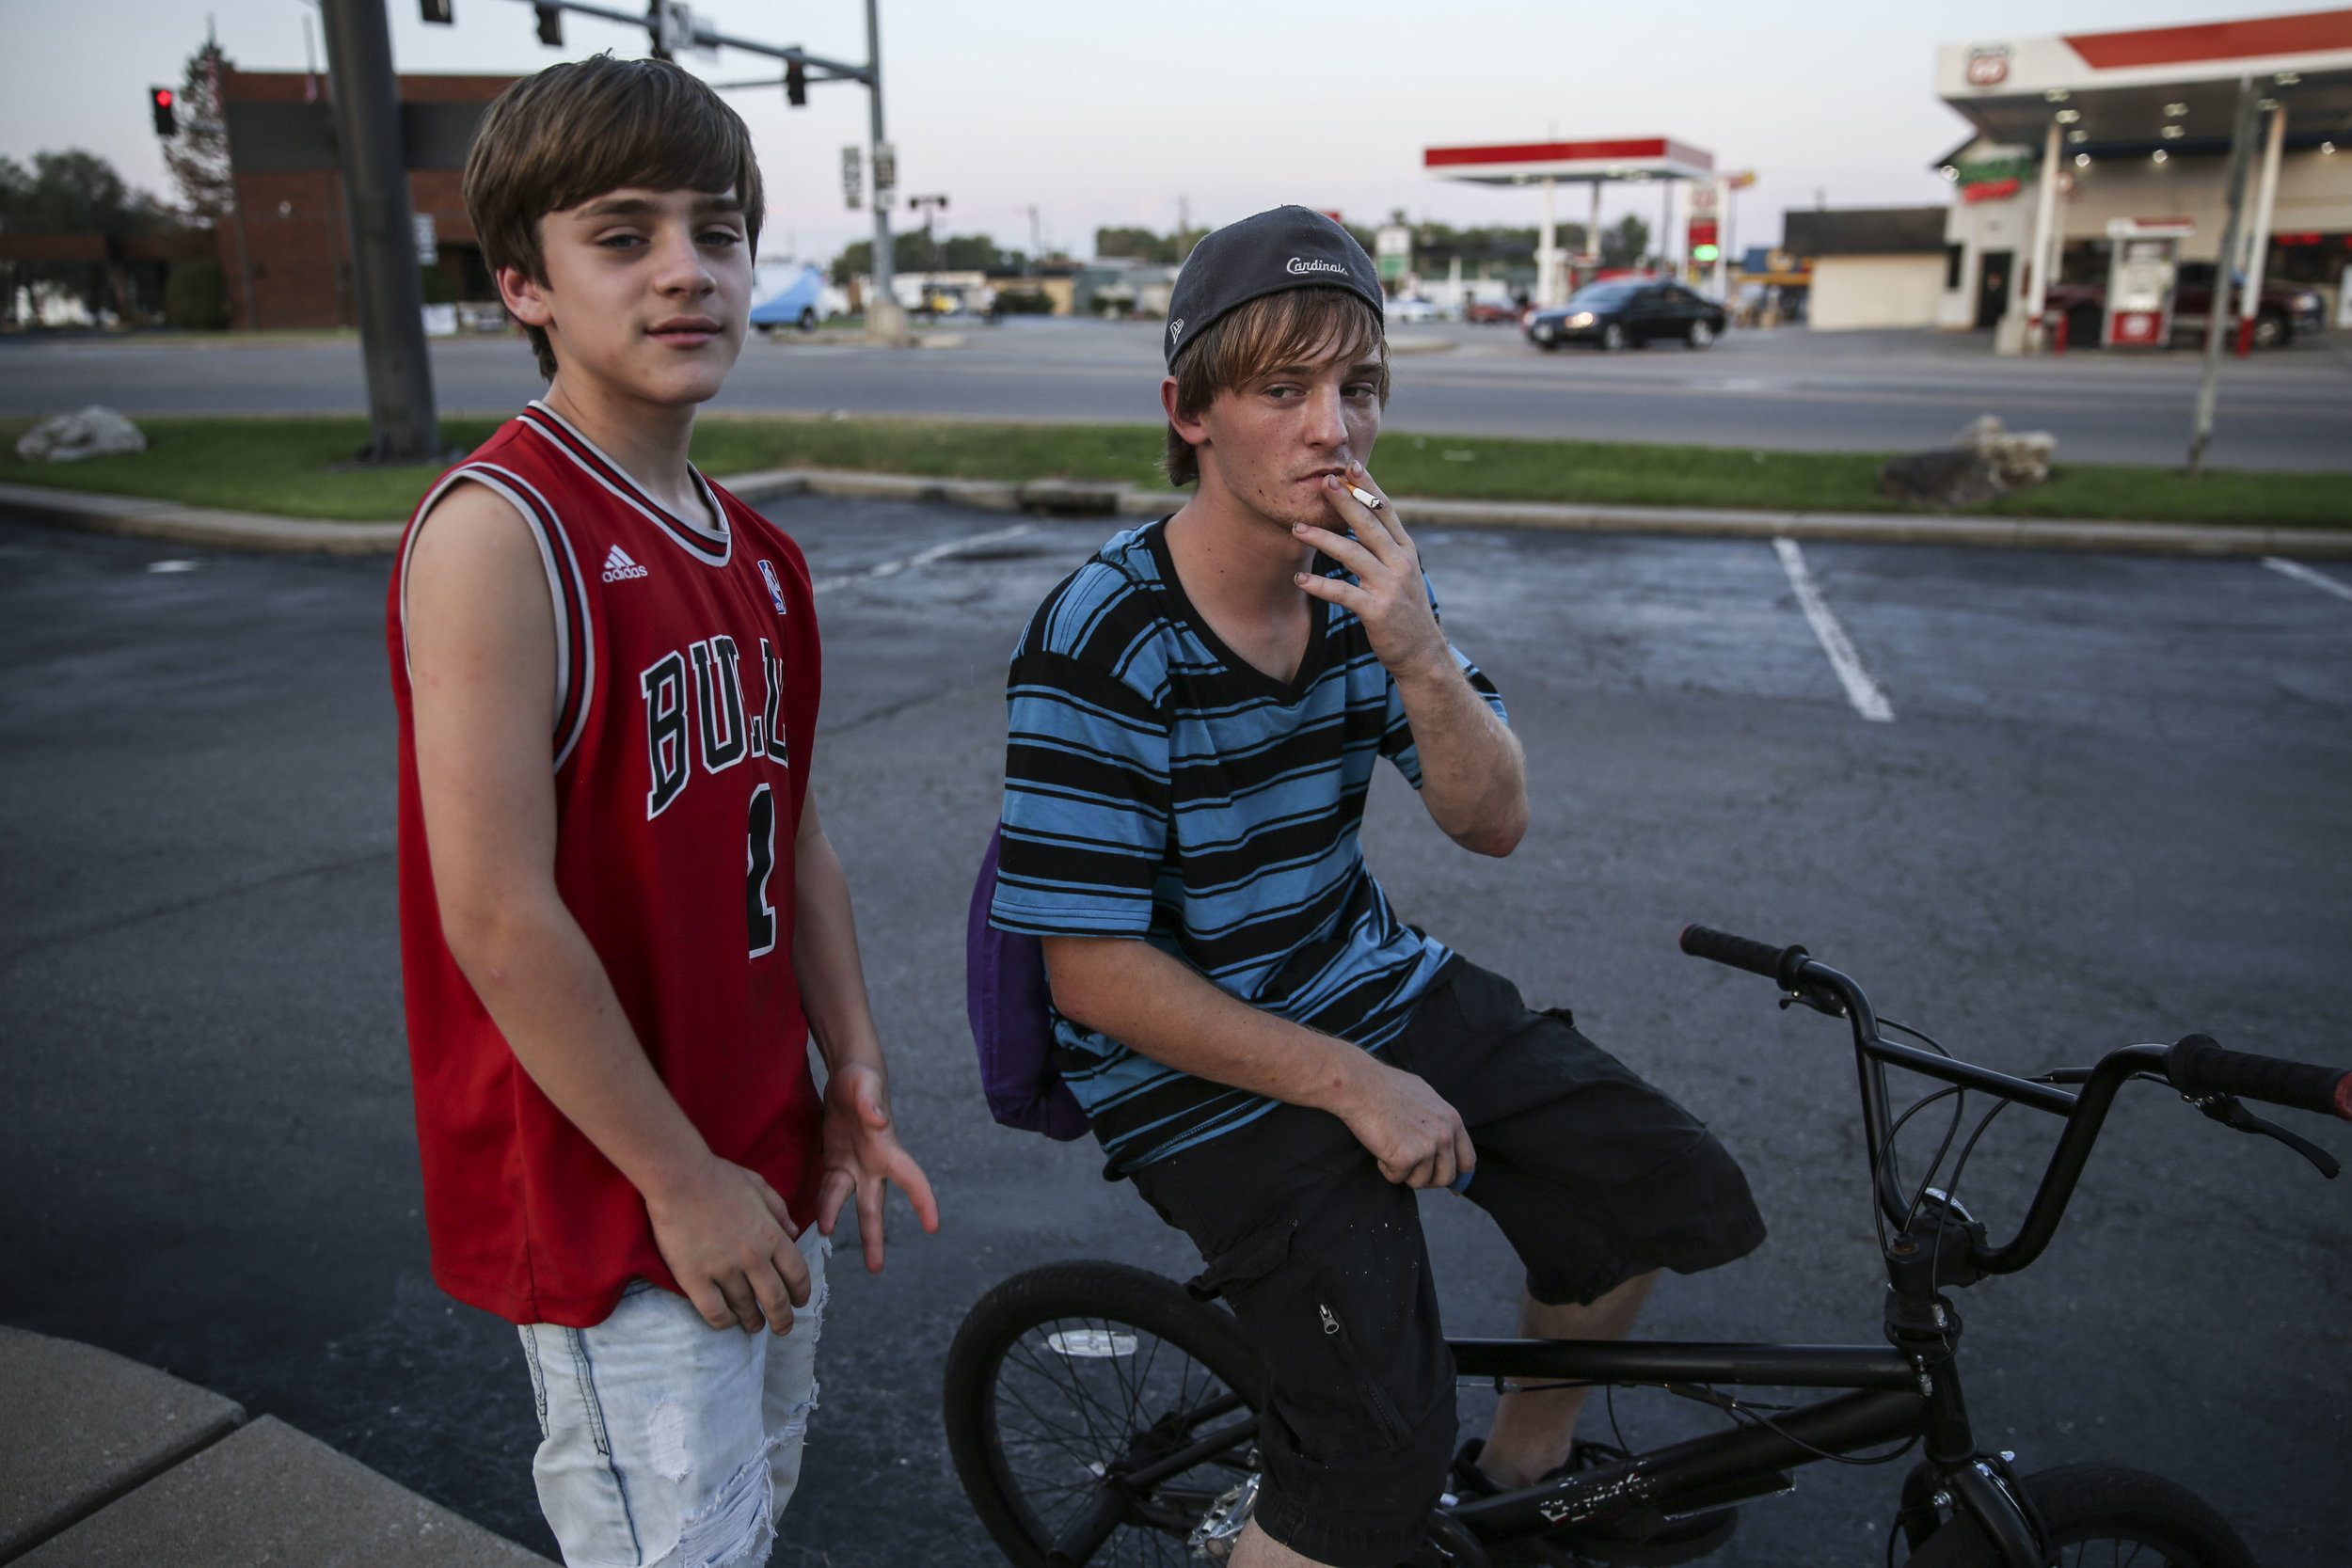   Dodge, 13, and Shawn, 20, hang out at McDonald’s, where much of the town’s youth spend time after school or late at night. Shawn currently lives in a tent in a friend’s lawn, and hopes to rent an apartment next month.  